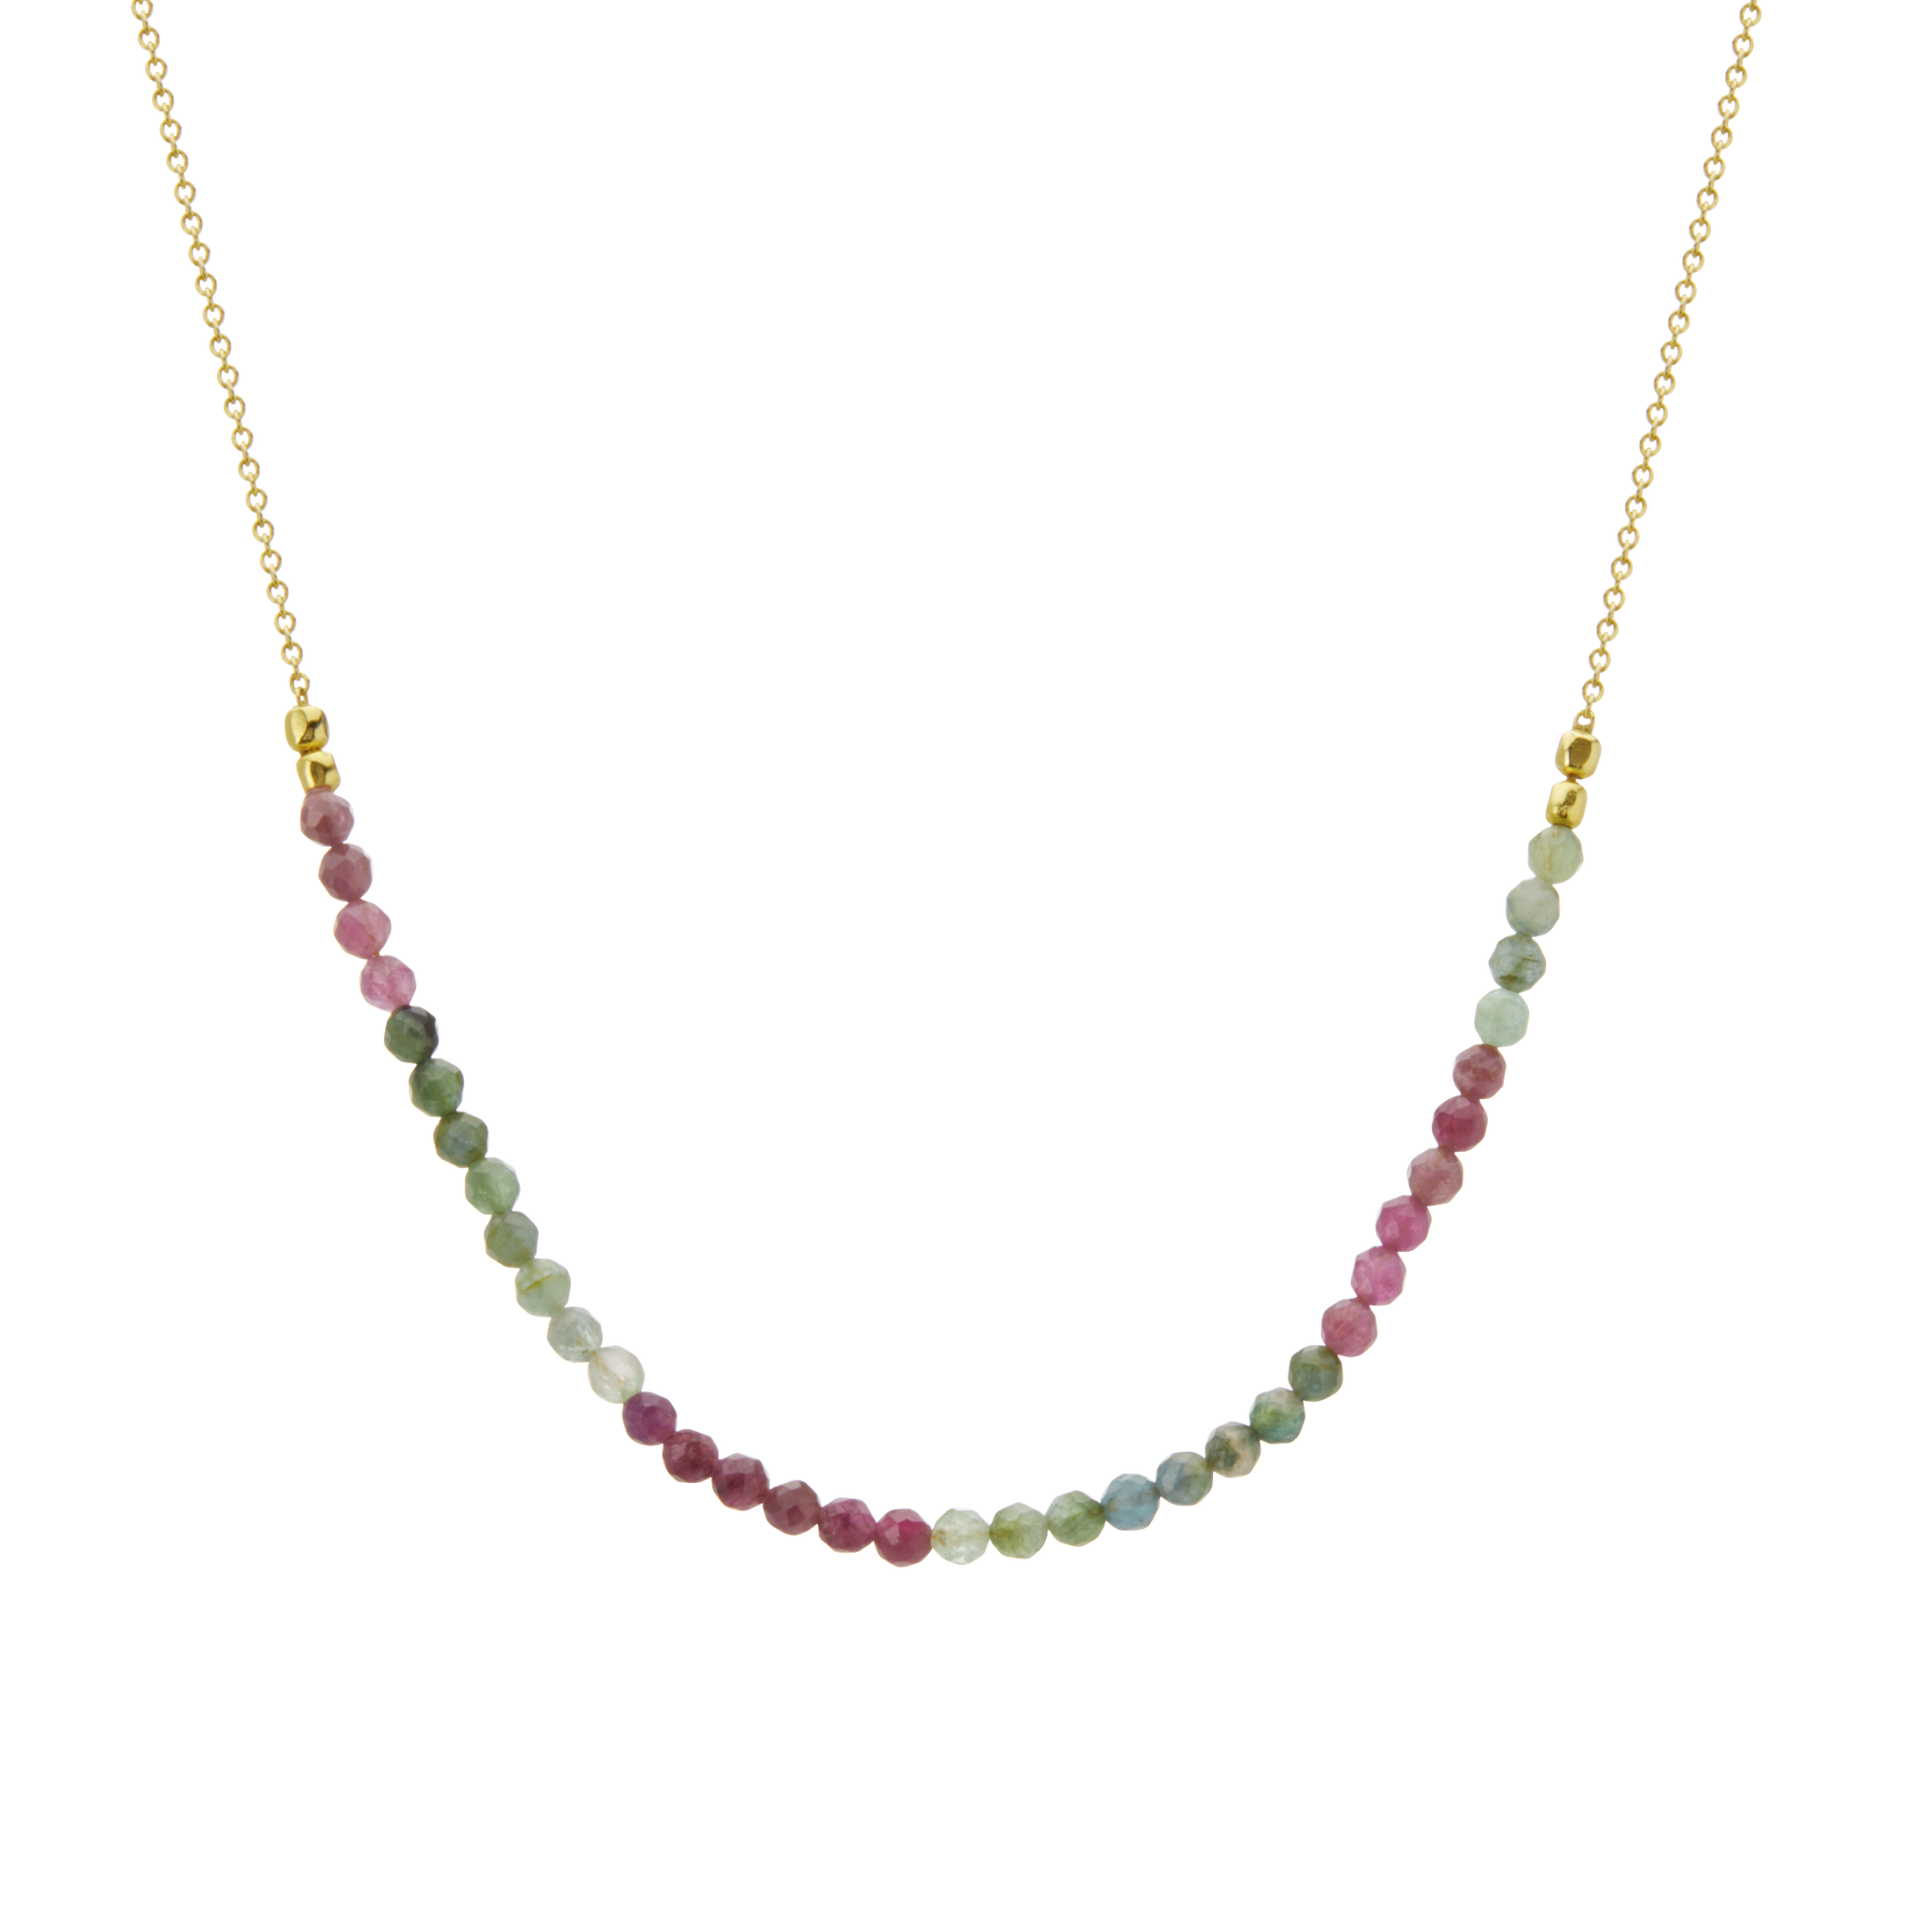 Wandering Soul Tourmaline Necklace in 18KT Yellow Gold Plate